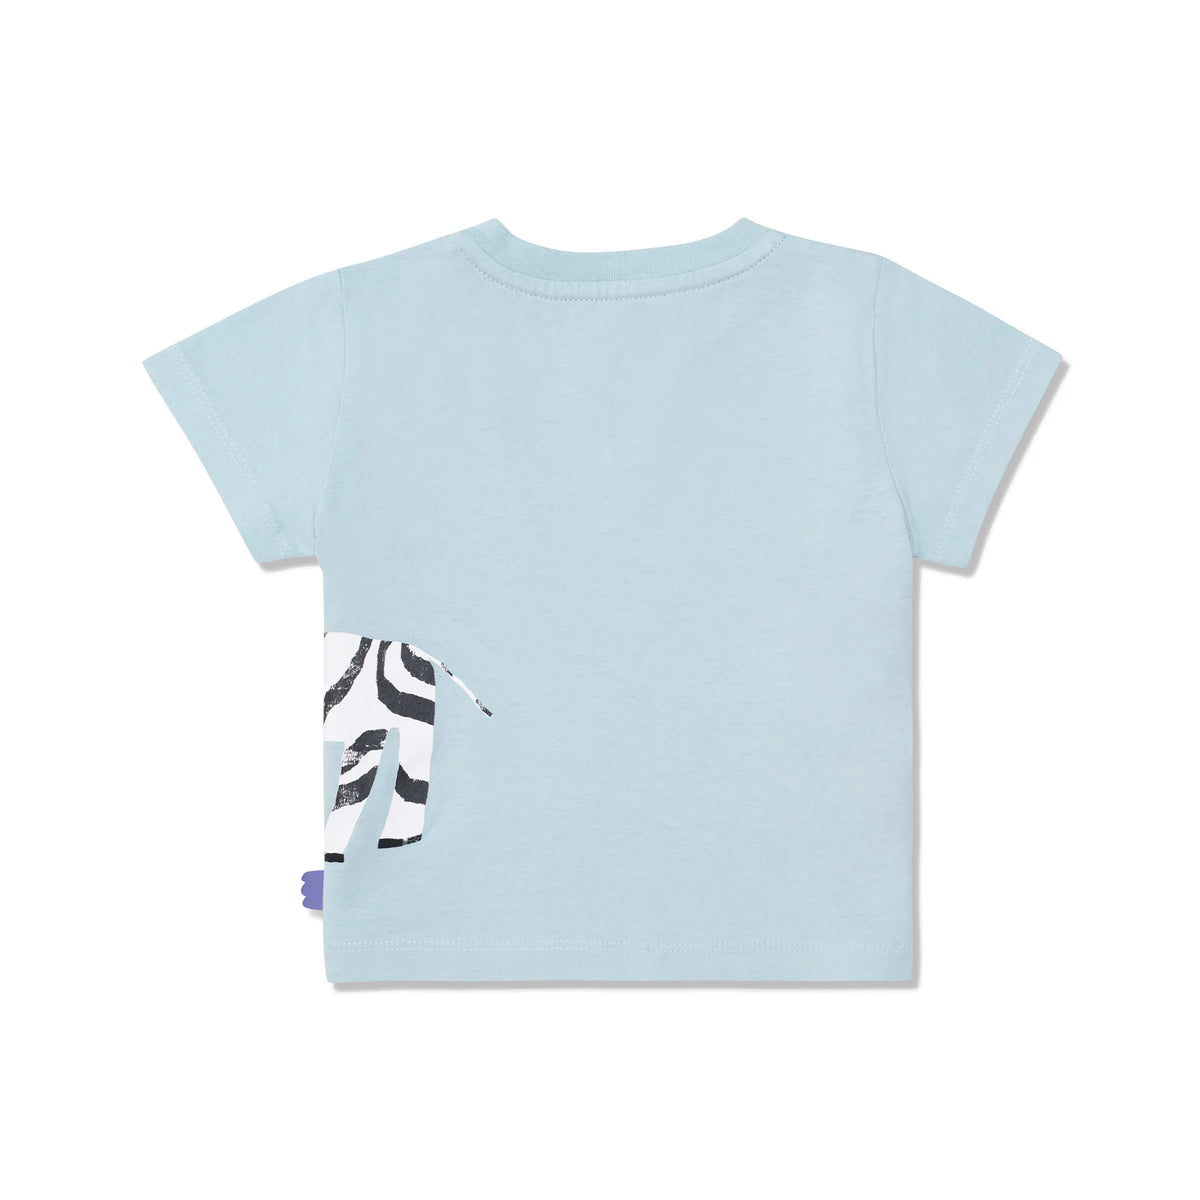 Recycled cotton Zebra Baby T-shirt